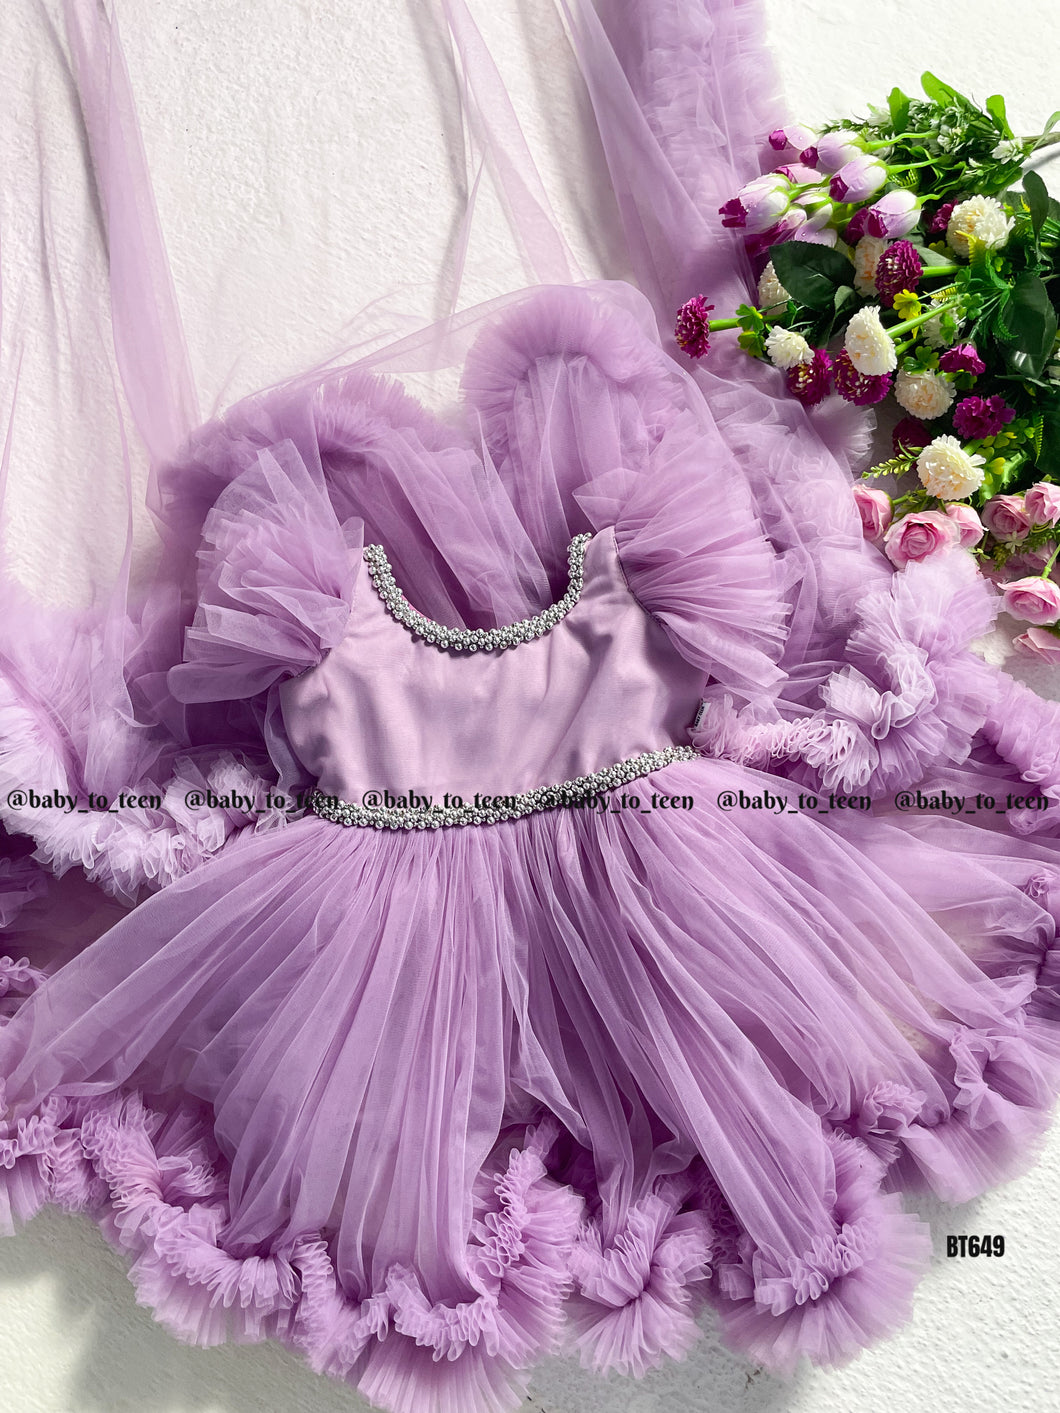 BT649 Lavender Dream: Elegant Party Dress with Crystal Accents